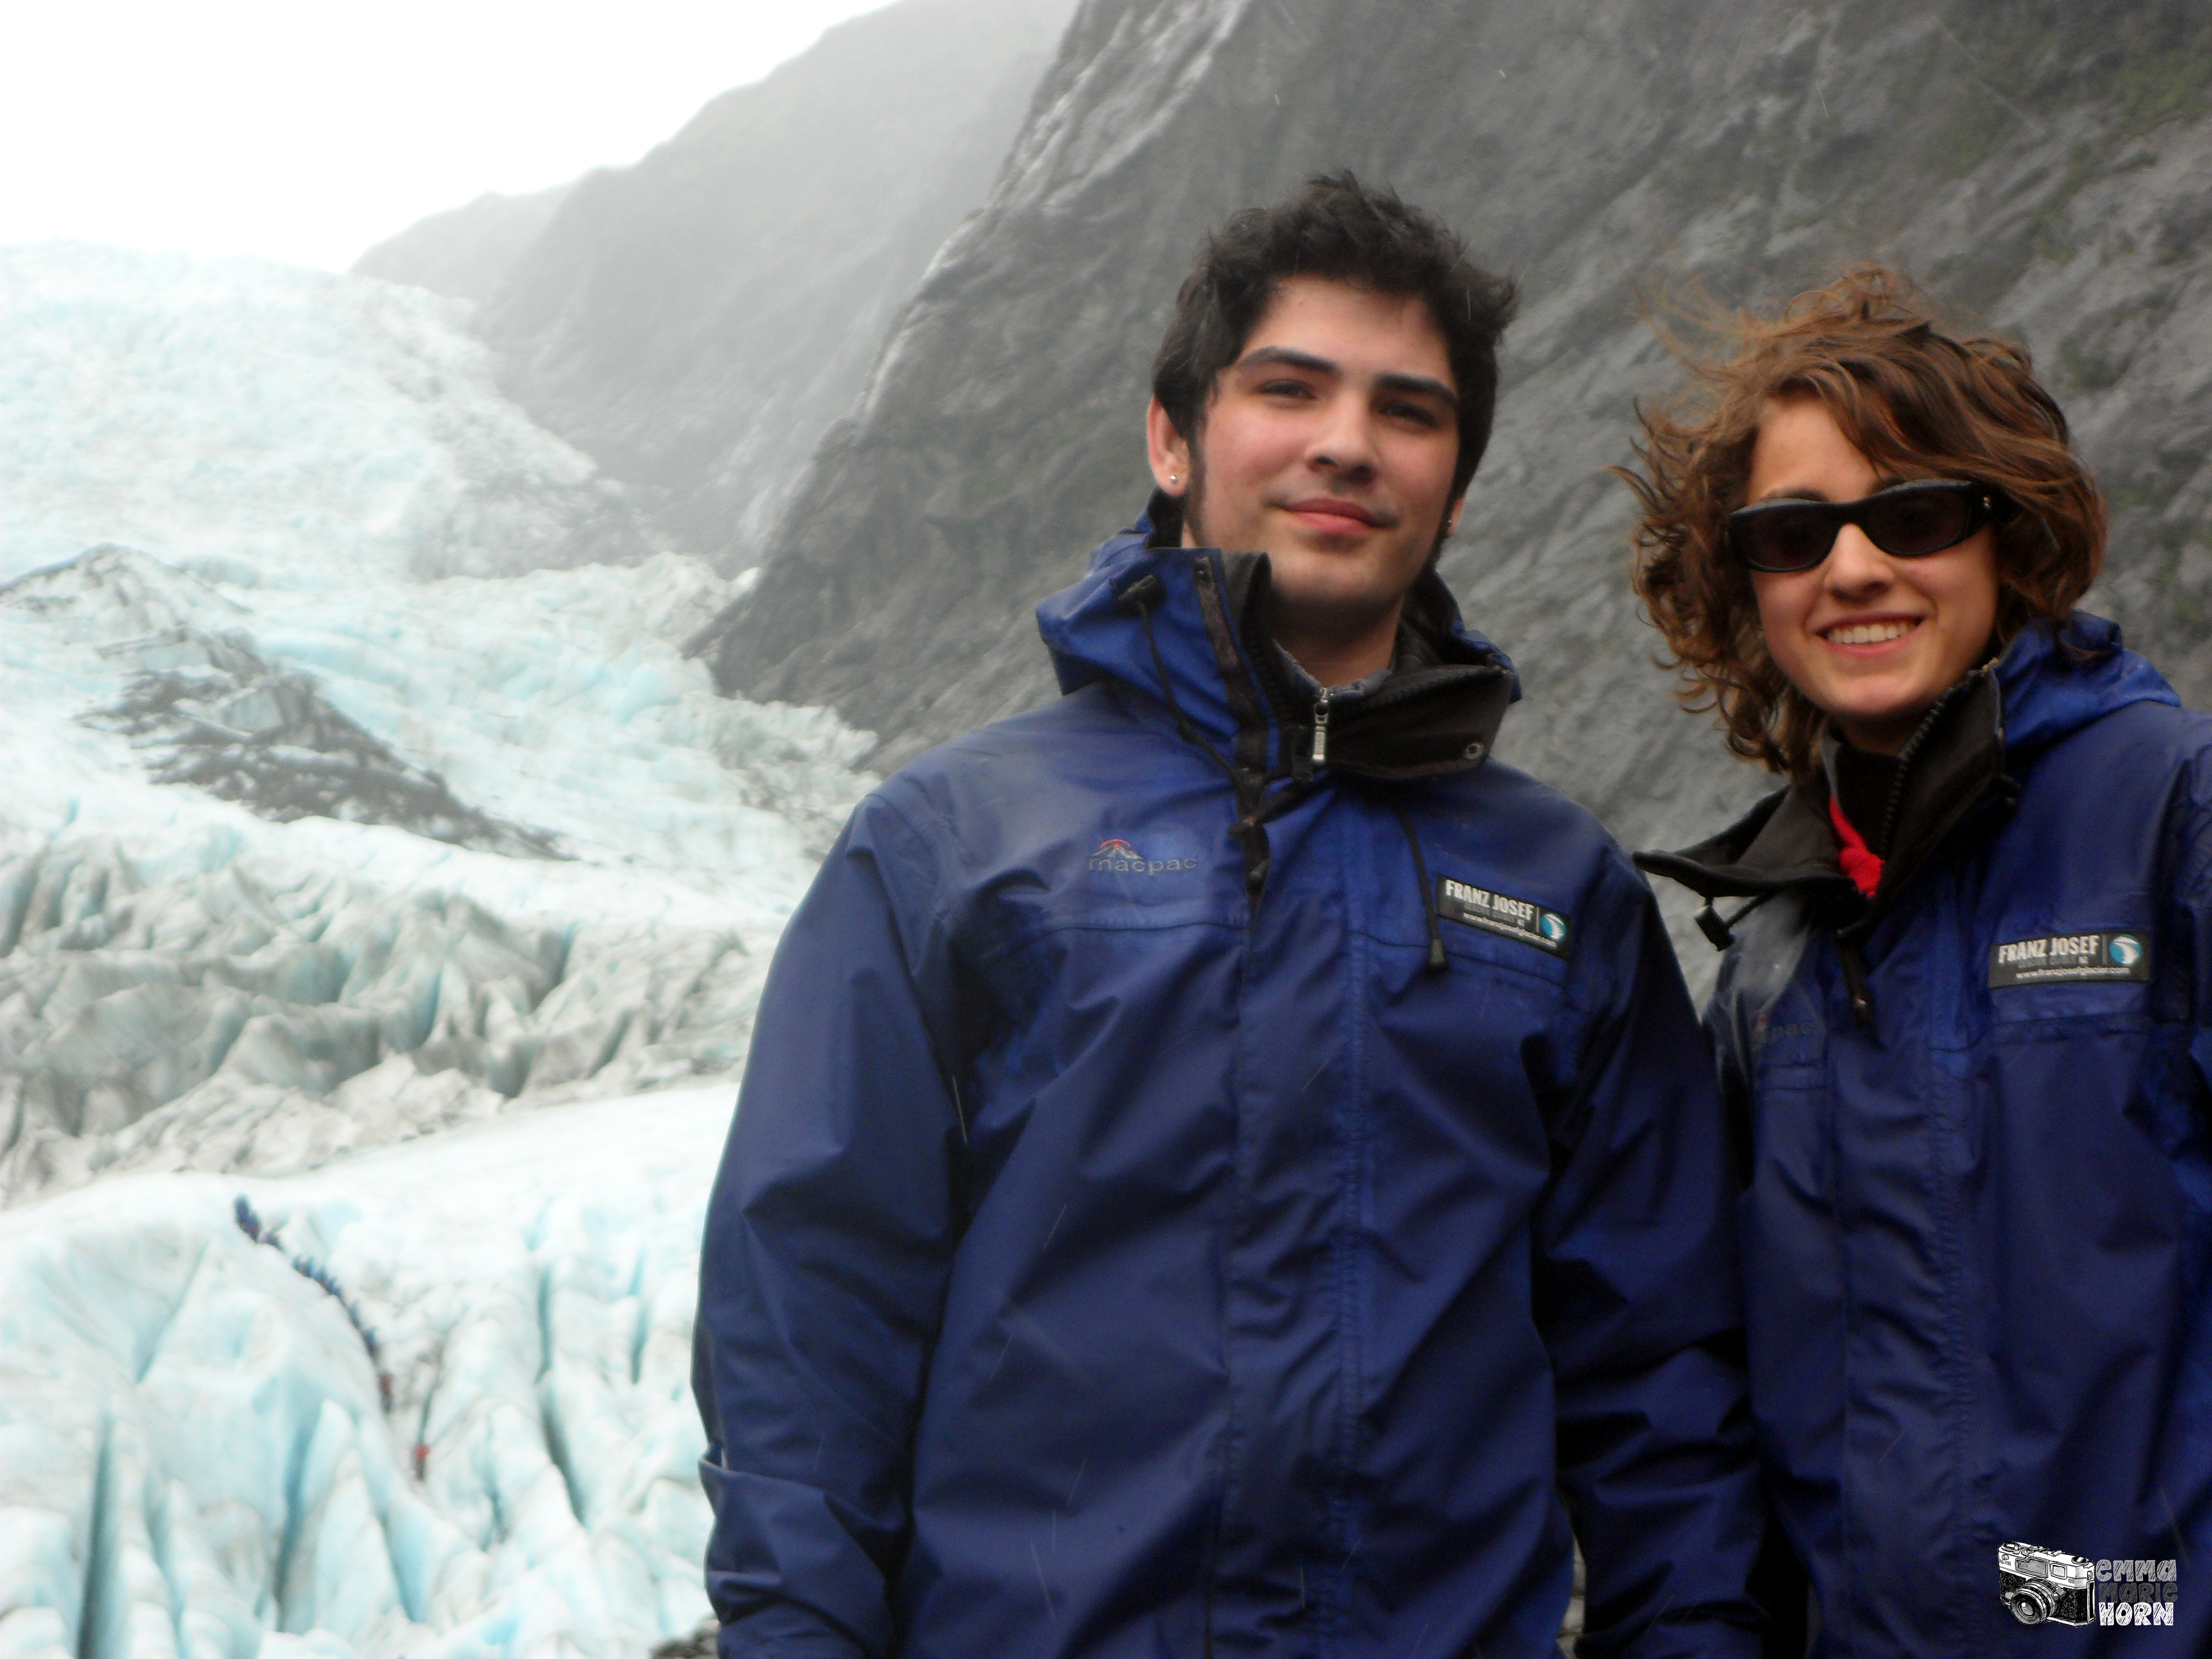 Myself with my brother and travel partner Brendan at the foot of Franz Josef Glacier. Photo: Emma Marie Horn